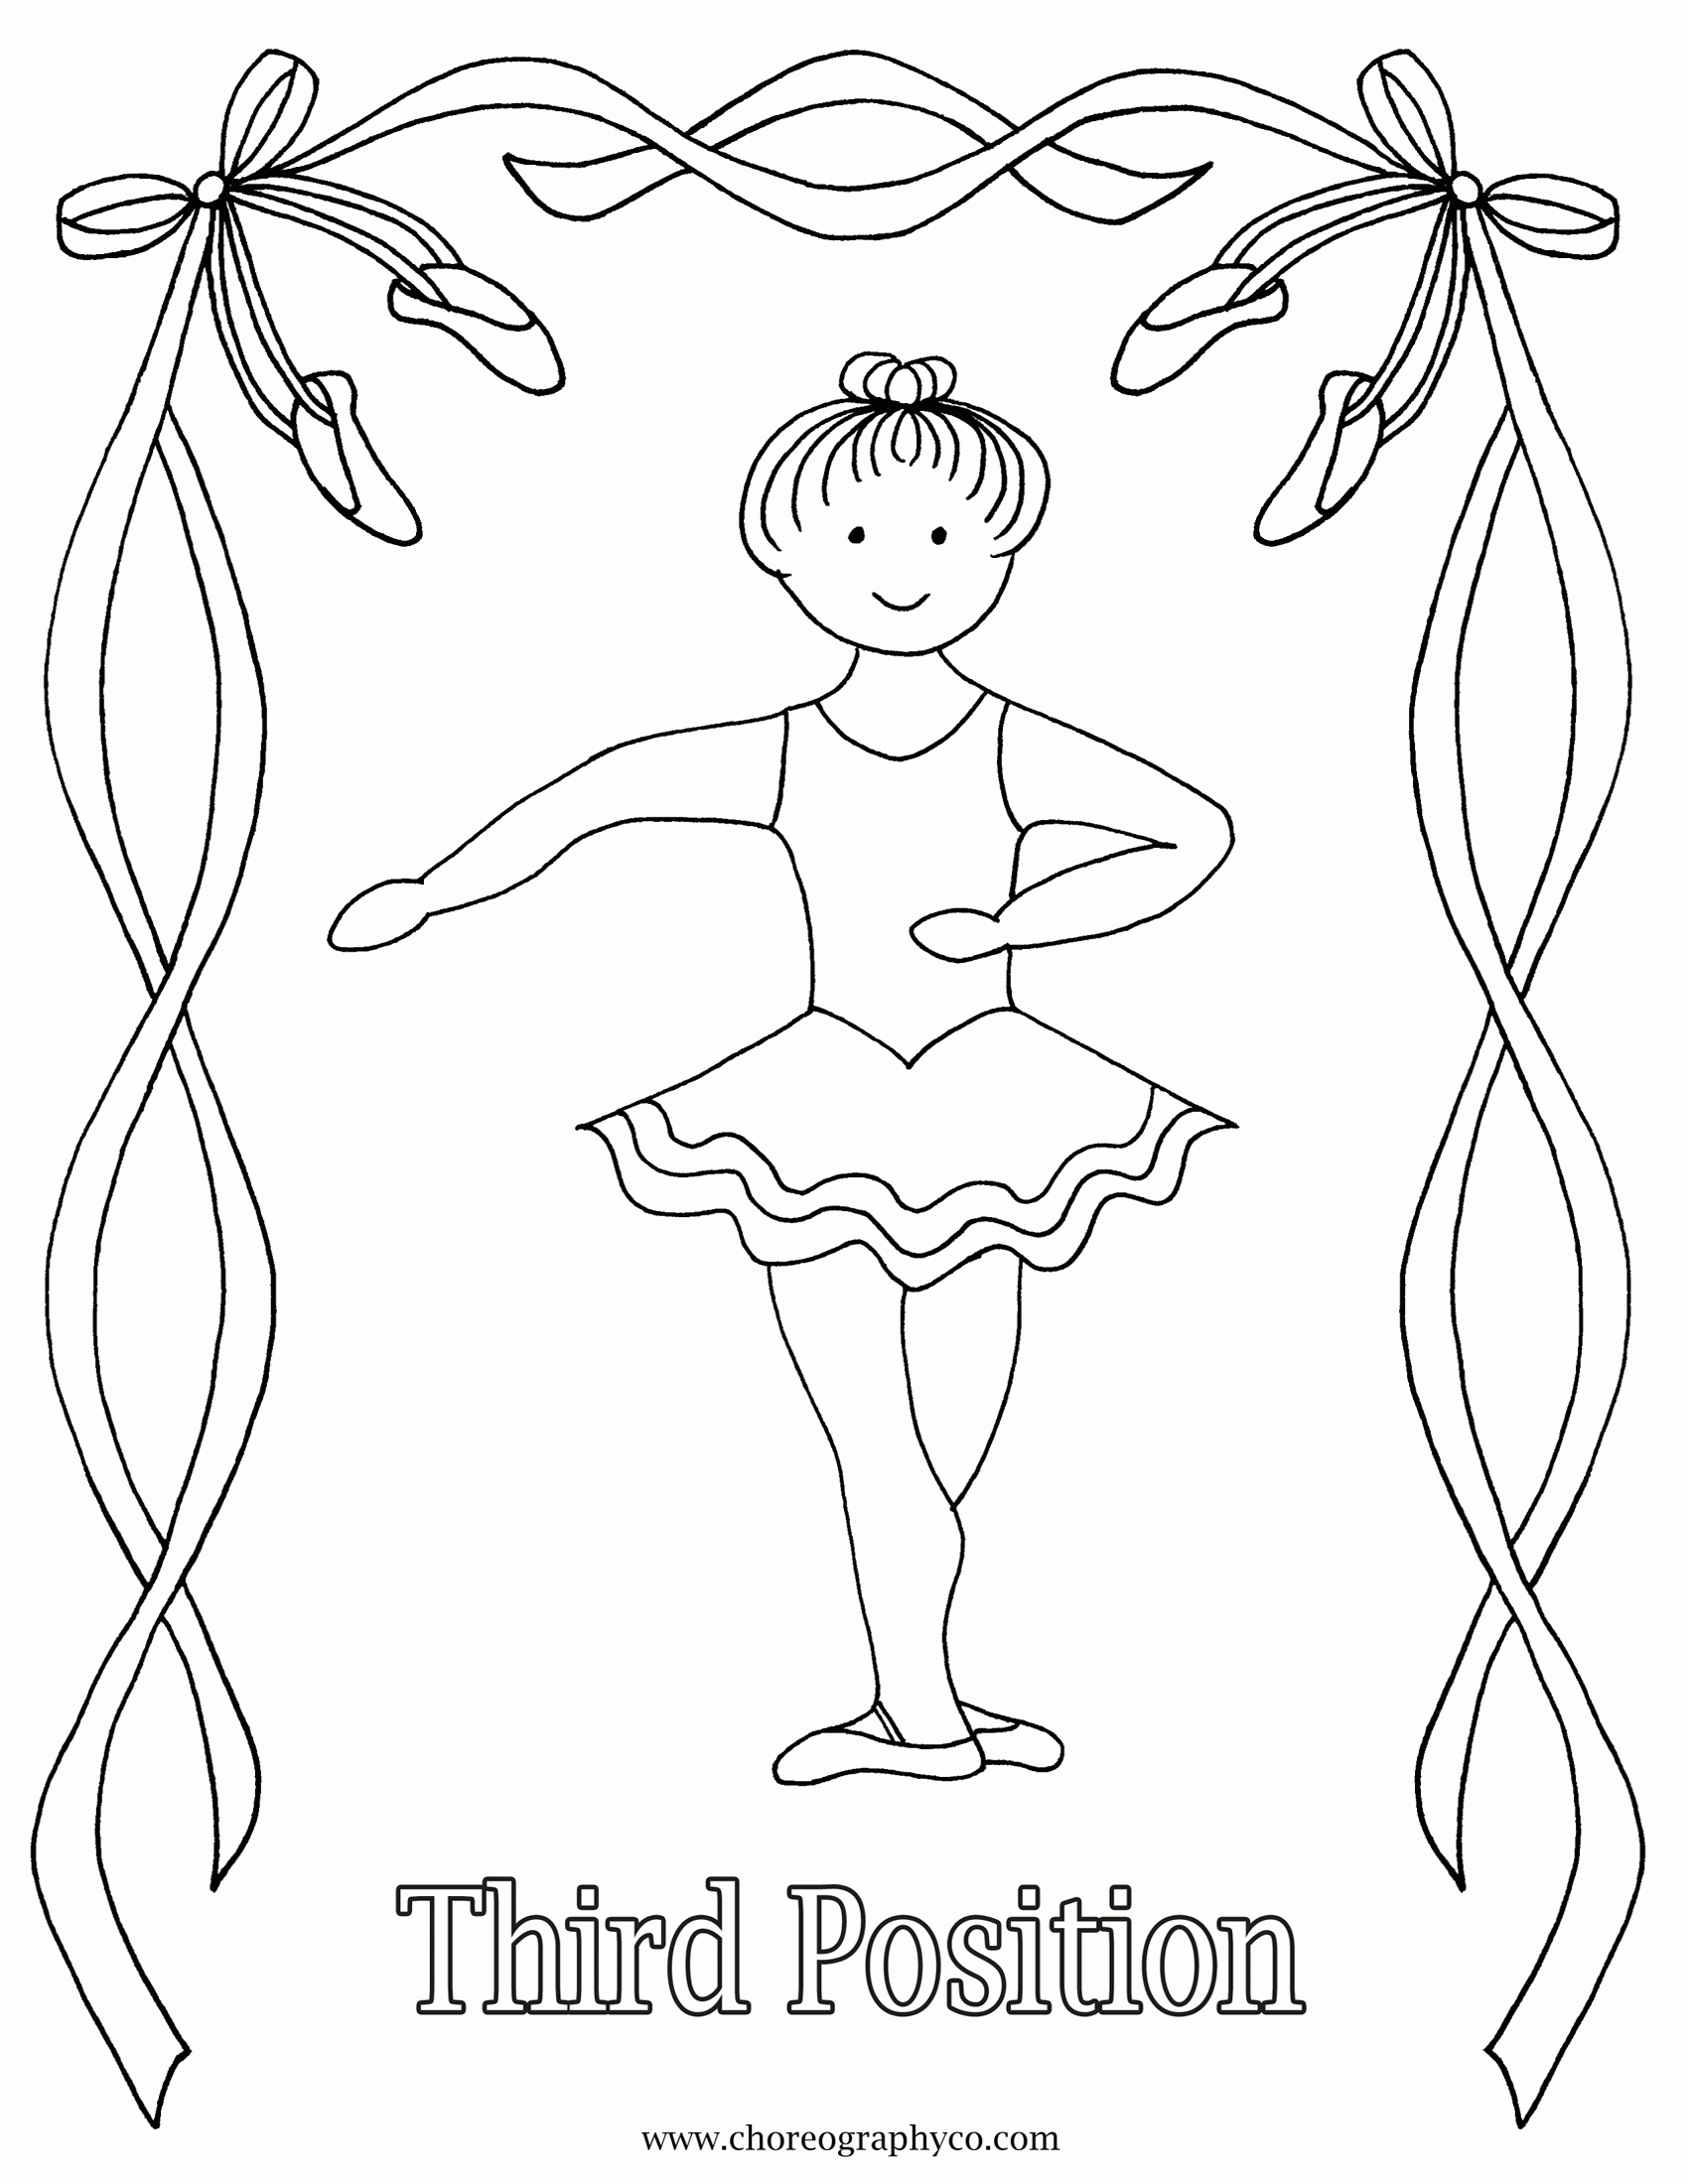 Ballerina Coloring Pages For Adults - Coloring Pages For All Ages